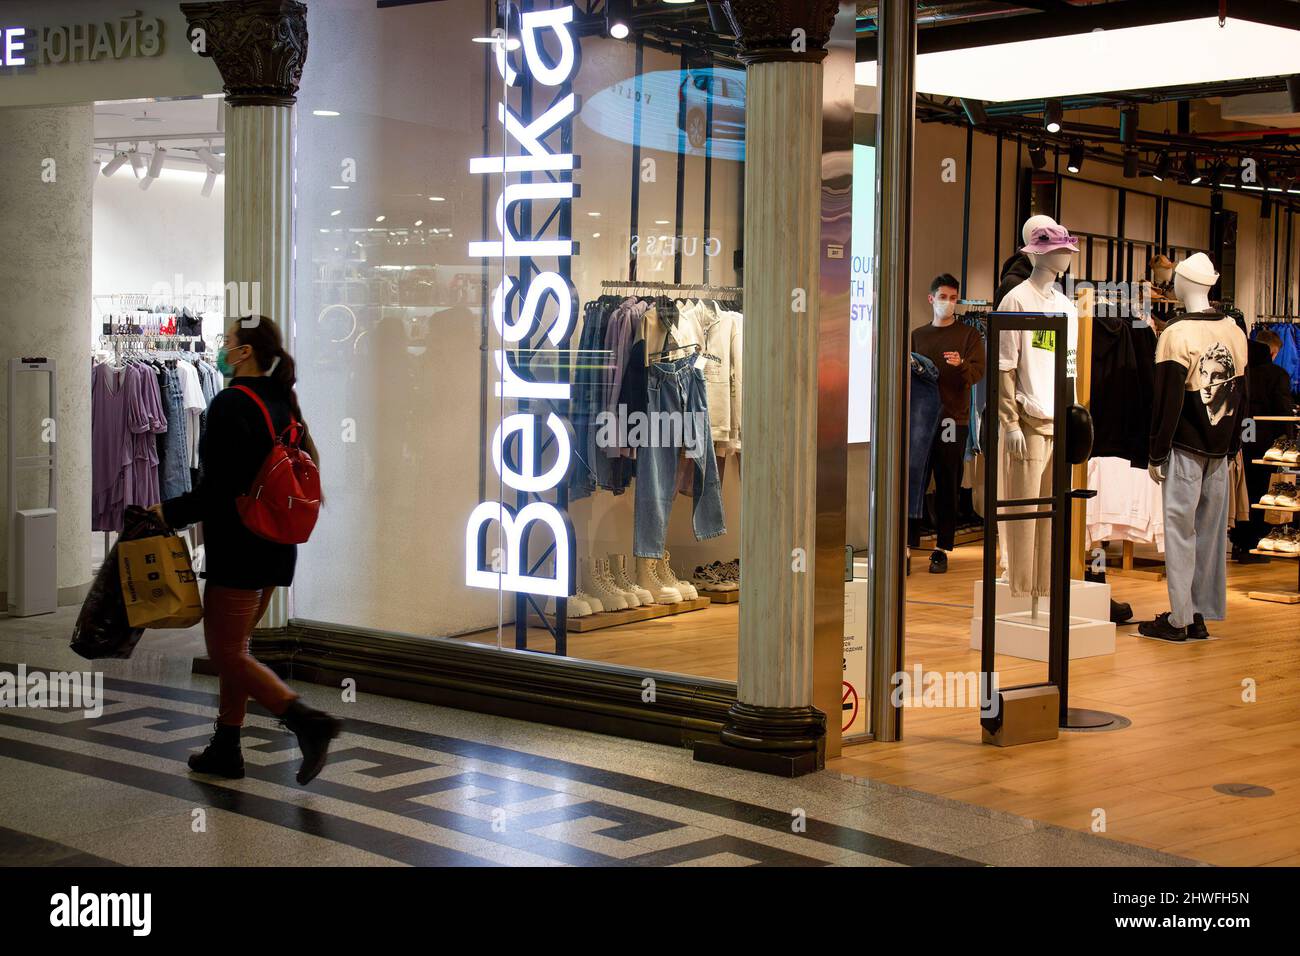 A woman passes by Bershka boutique in Moscow. The Spanish fashion retailer  Inditex, which owns such brands as Zara, Bershka, Pull&Bear, Massimo Dutti,  Stradivarius, and others, announced it was halting trading in